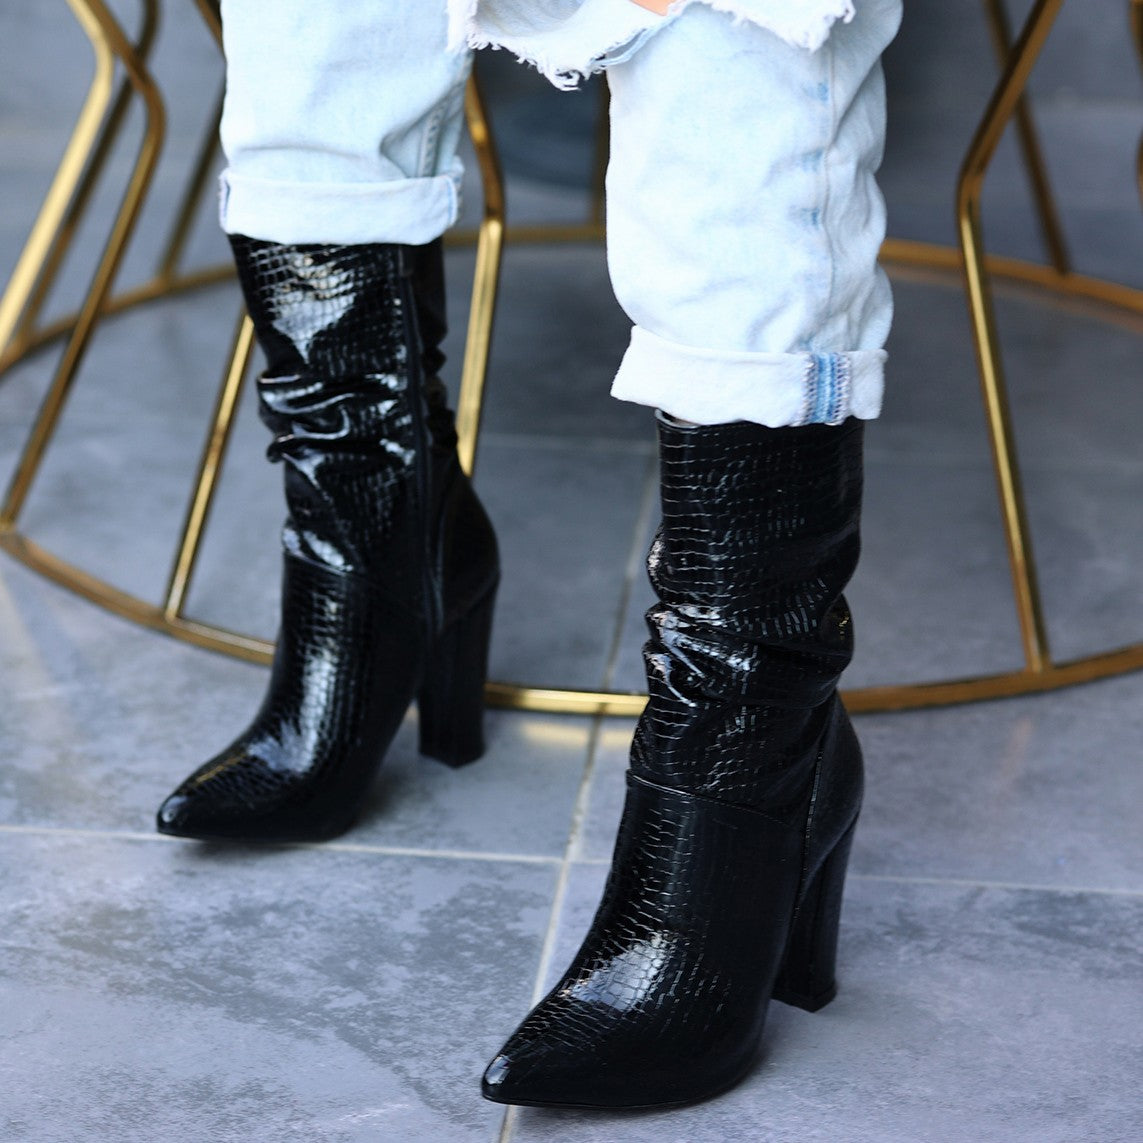 Women's Erita Black Patent Leather Patterned Heeled Boots - STREETMODE ™